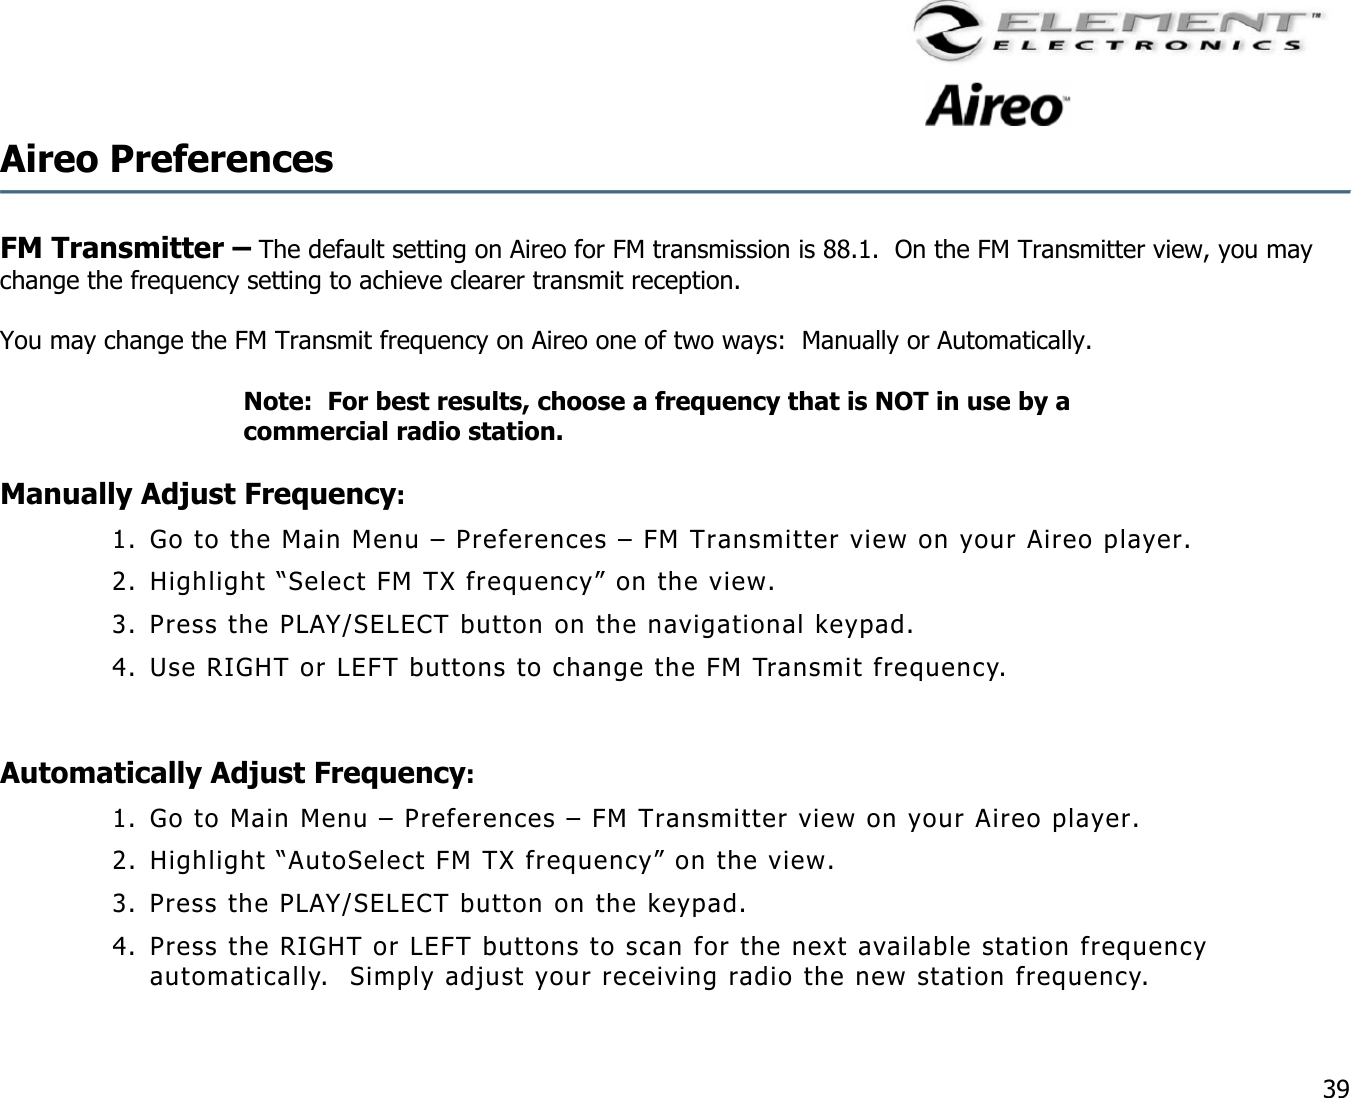                                                                                    39 Aireo Preferences    FM Transmitter – The default setting on Aireo for FM transmission is 88.1.  On the FM Transmitter view, you may change the frequency setting to achieve clearer transmit reception.     You may change the FM Transmit frequency on Aireo one of two ways:  Manually or Automatically.   Note:  For best results, choose a frequency that is NOT in use by a commercial radio station.   Manually Adjust Frequency: 1. Go to the Main Menu – Preferences – FM Transmitter view on your Aireo player. 2. Highlight “Select FM TX frequency” on the view. 3. Press the PLAY/SELECT button on the navigational keypad. 4. Use RIGHT or LEFT buttons to change the FM Transmit frequency.    Automatically Adjust Frequency: 1. Go to Main Menu – Preferences – FM Transmitter view on your Aireo player. 2. Highlight “AutoSelect FM TX frequency” on the view. 3. Press the PLAY/SELECT button on the keypad. 4. Press the RIGHT or LEFT buttons to scan for the next available station frequency automatically.  Simply adjust your receiving radio the new station frequency. 